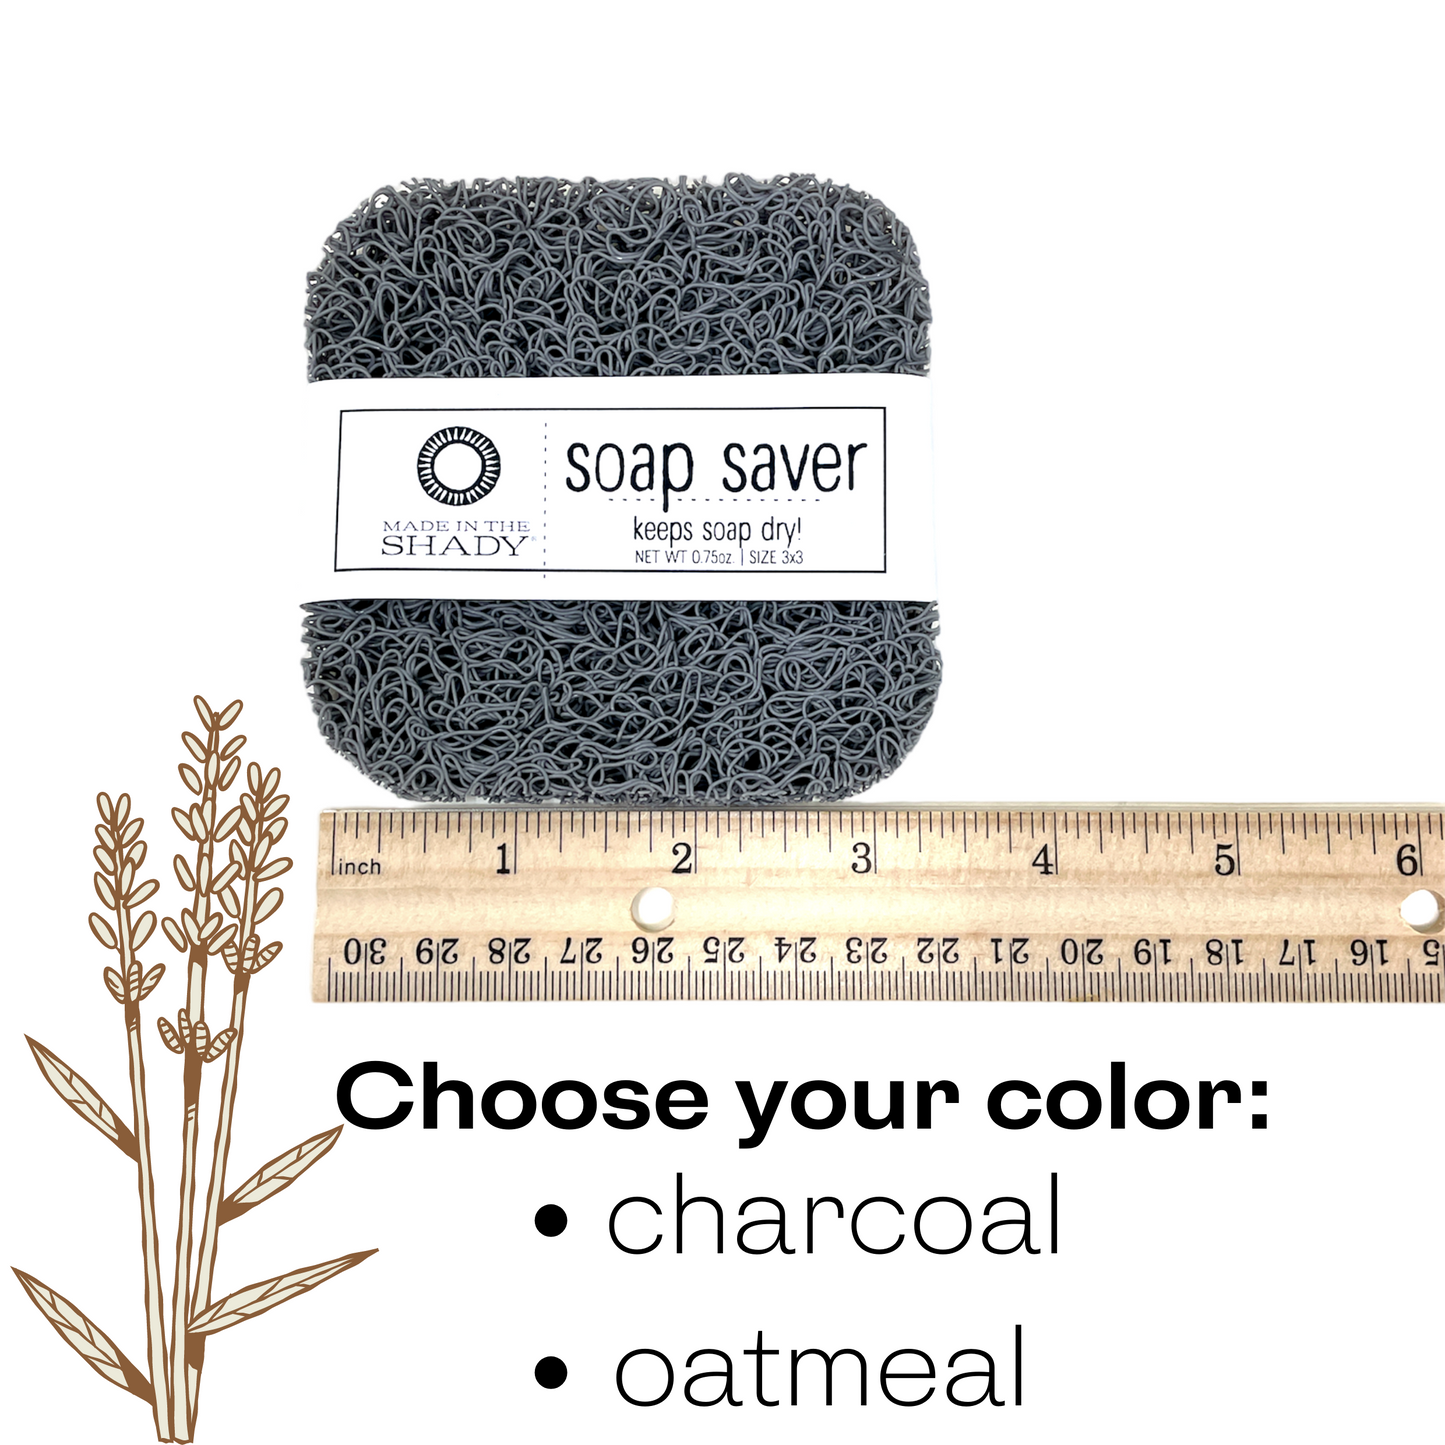 Soap Saver Soap Lift Soap Riser Pad Natural in Color charcoal or oatmeal